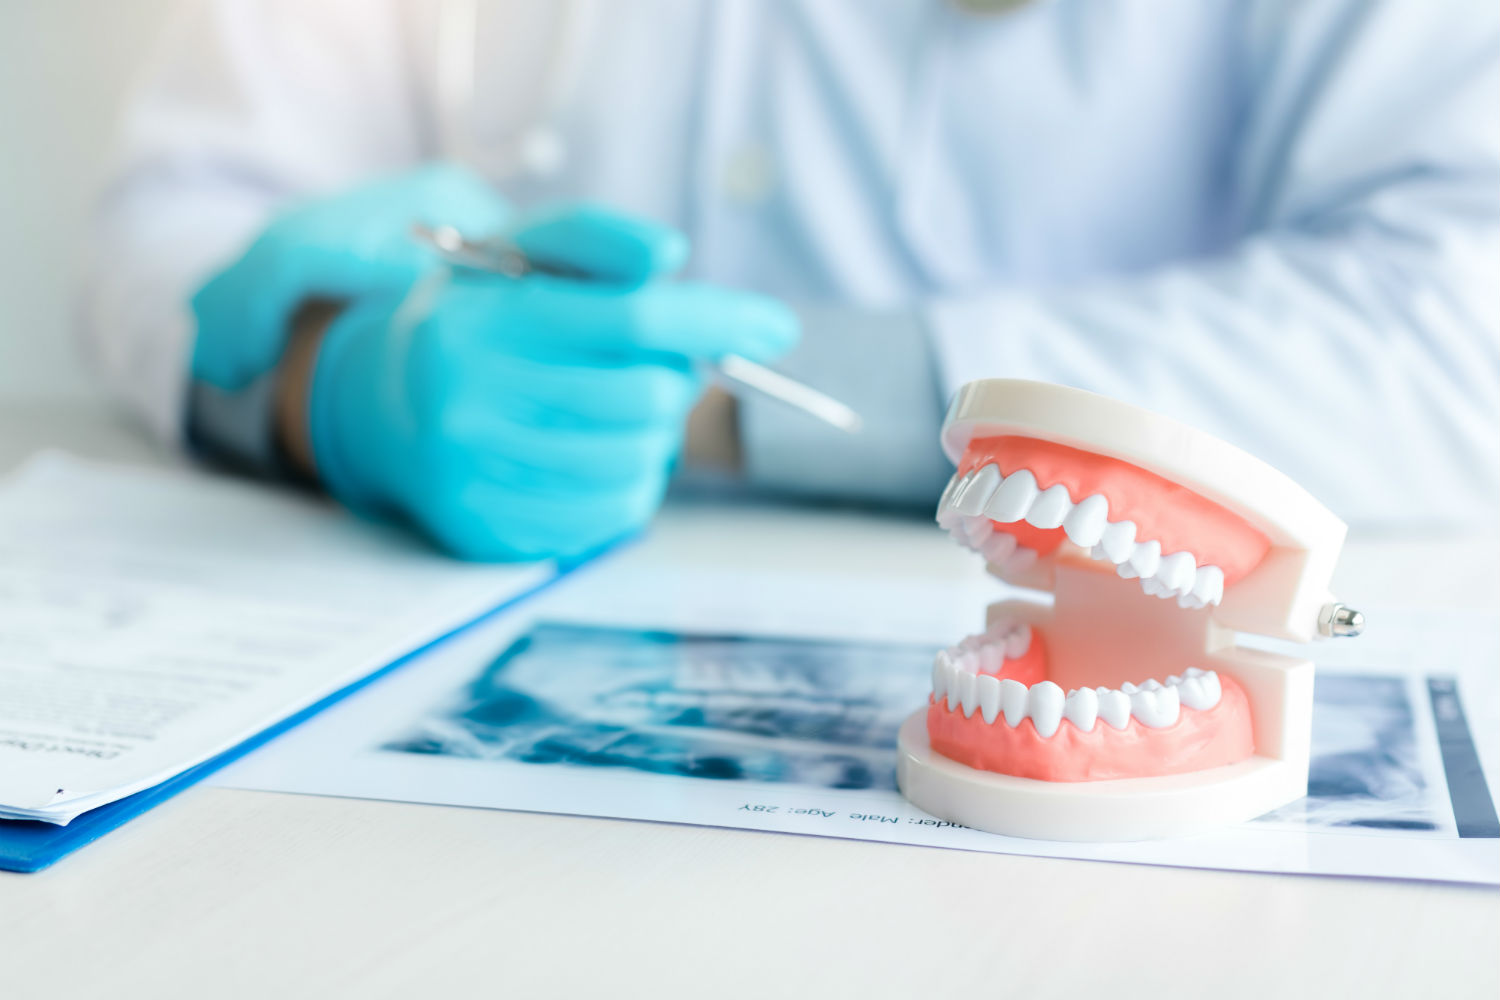 Stock image of dentures on table along with a faded image of a doctor